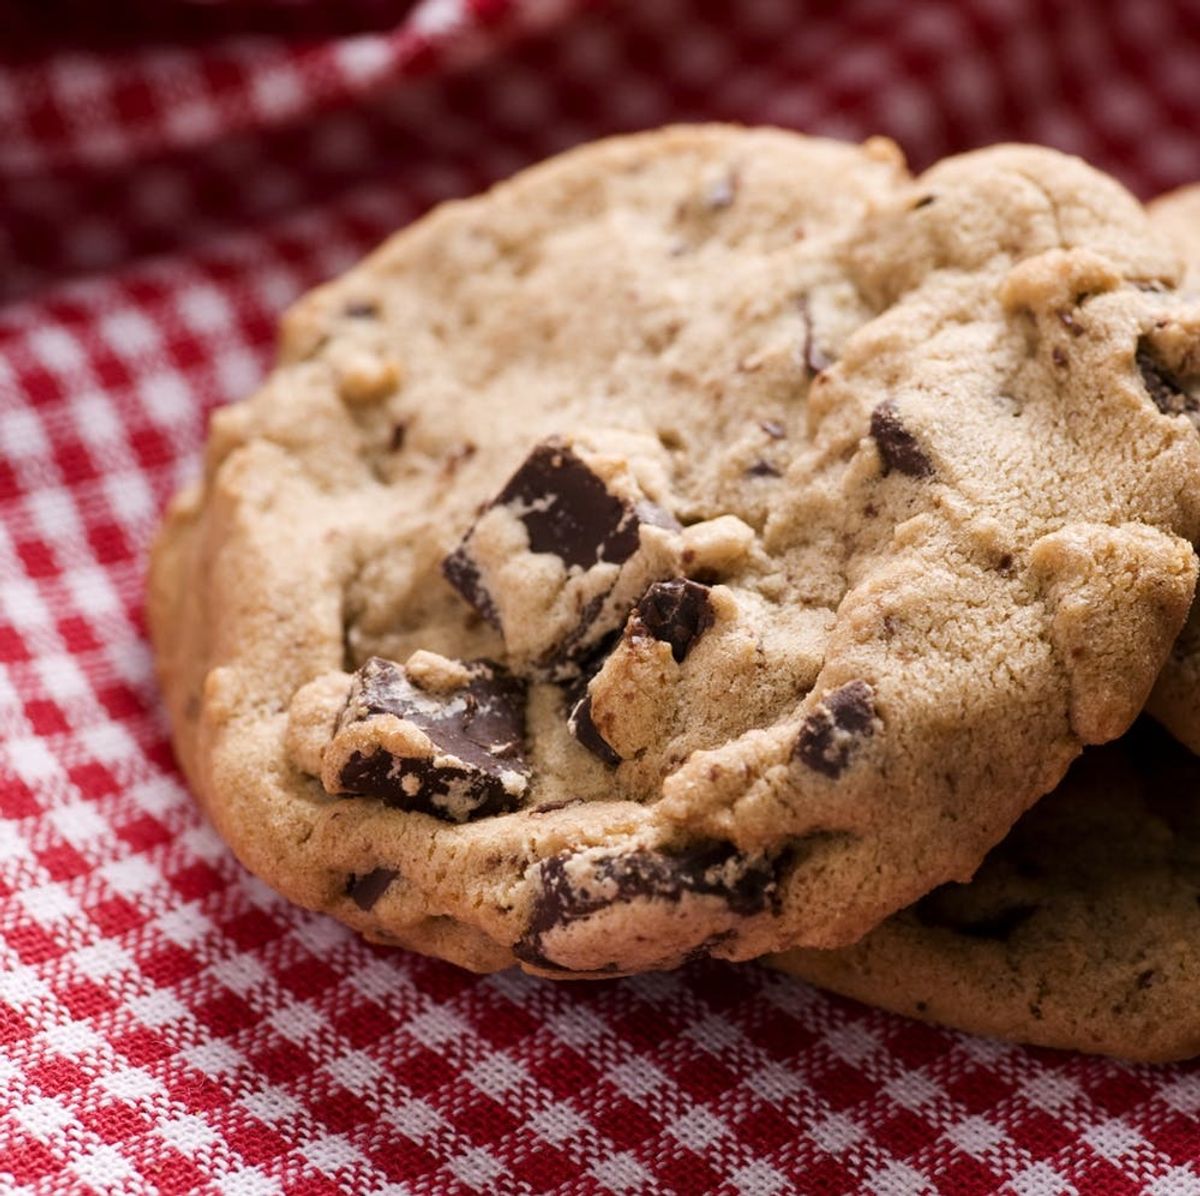 Find the Best Chocolate Chip Cookies in Every State With This AMAZING List